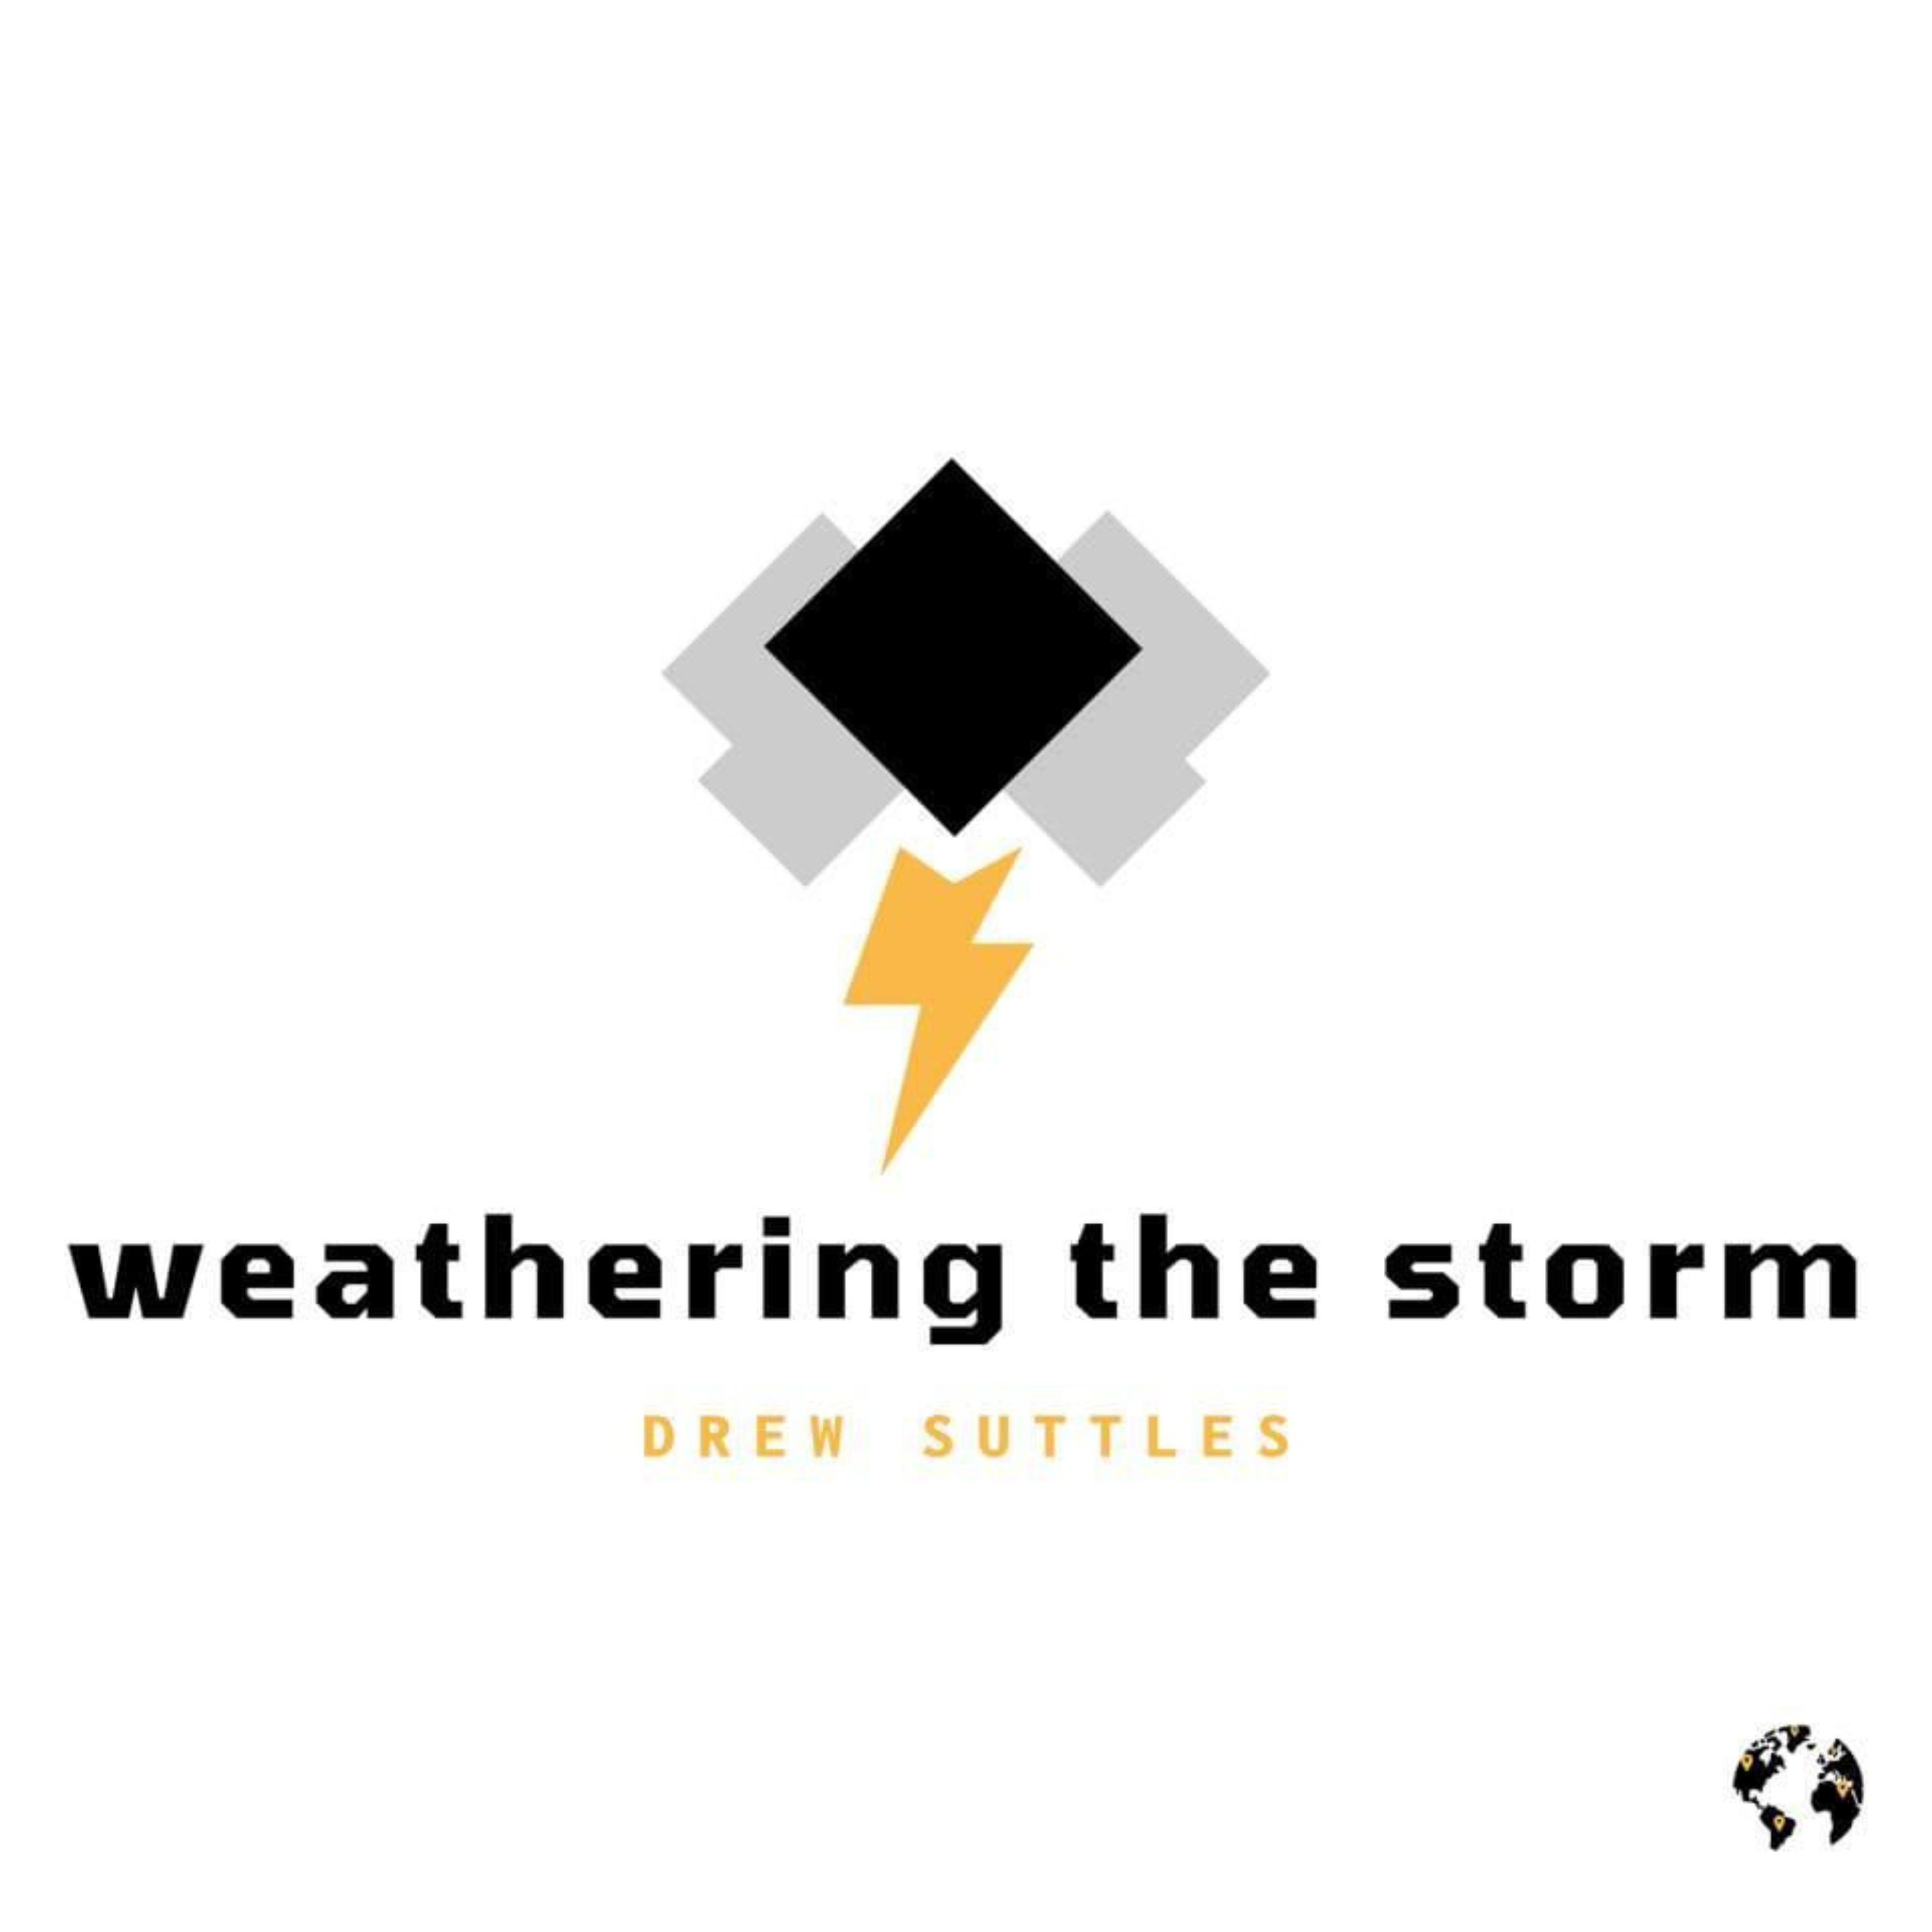 [Weathering the Storm] Put on the Whole Armor of God (Pt. 4) (Eph. 6:17-18)